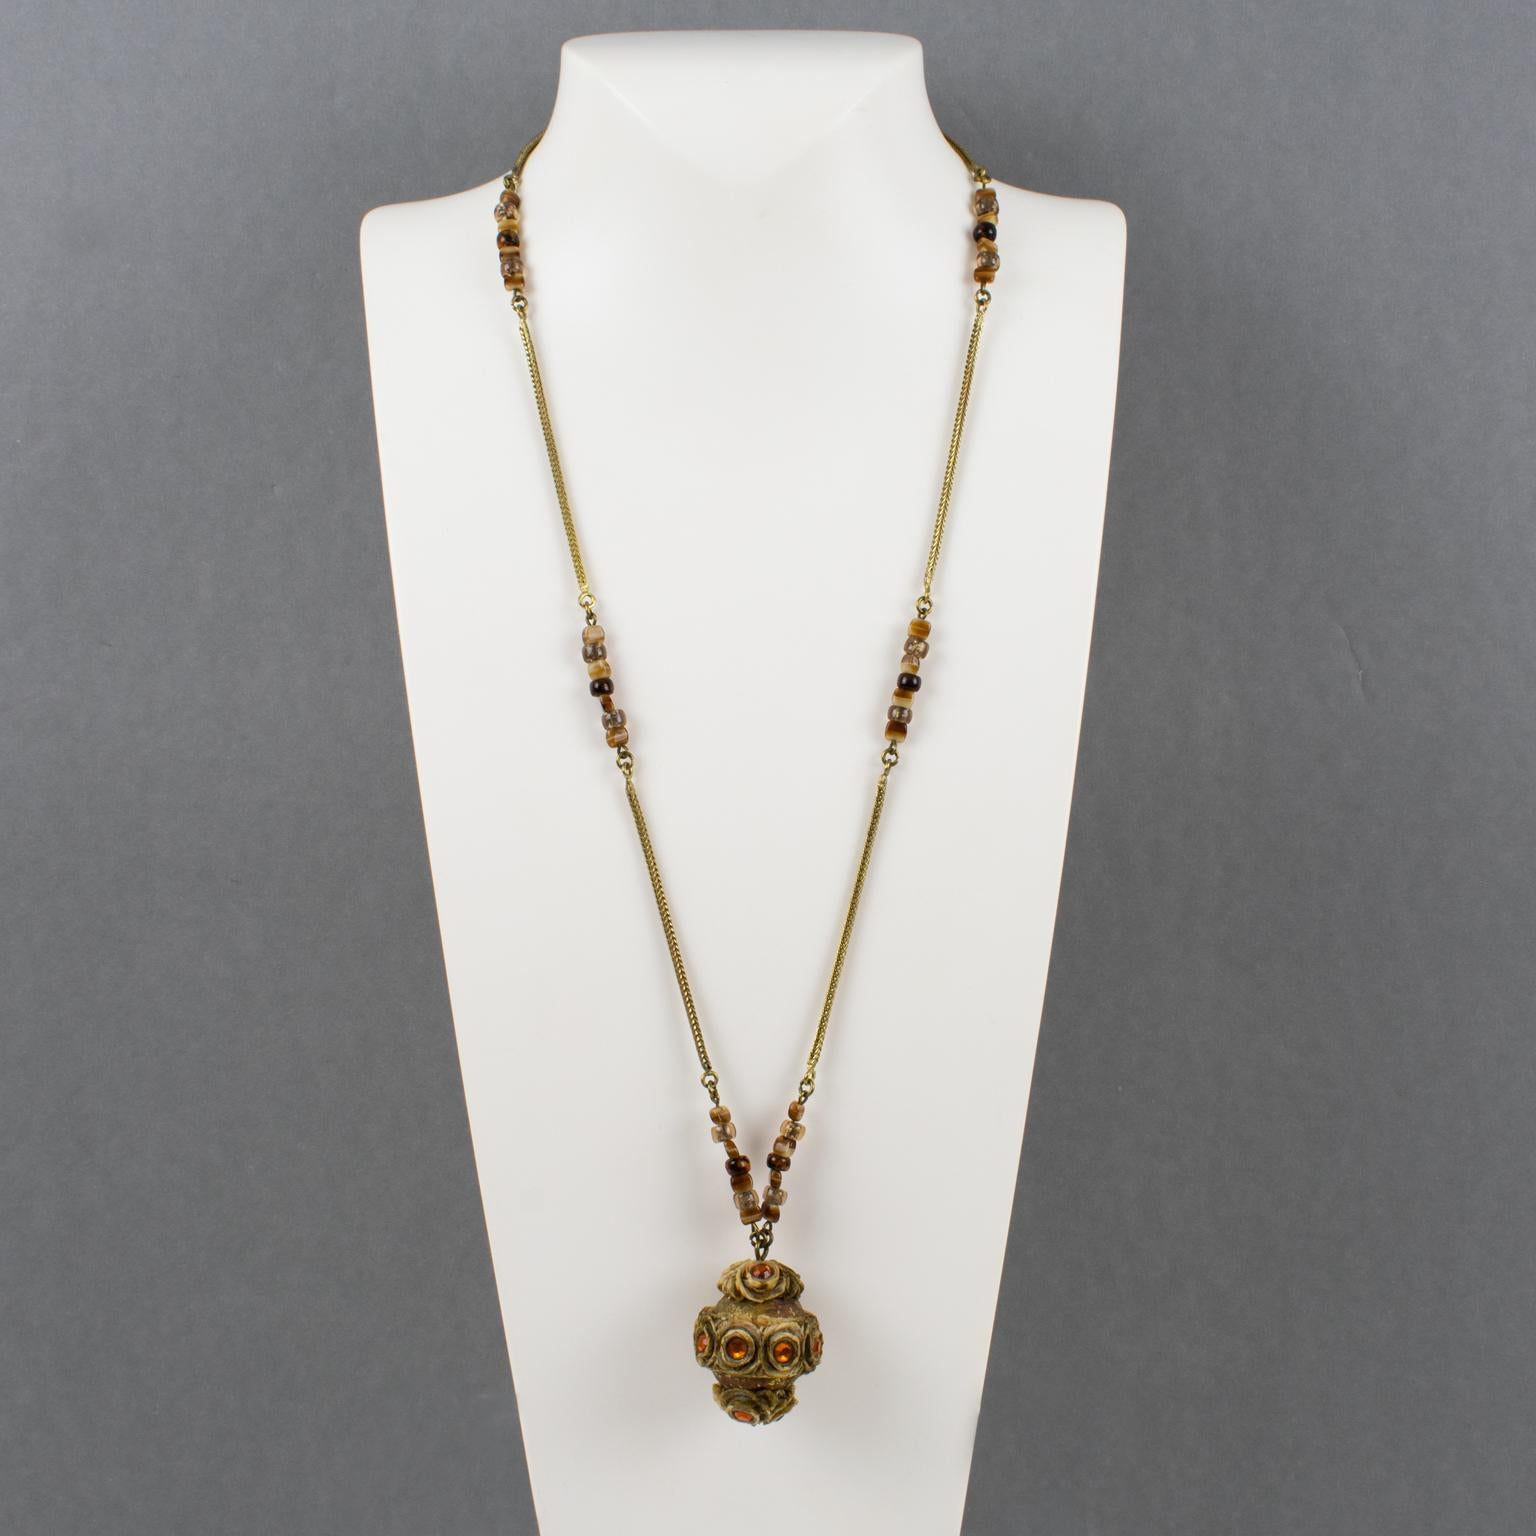 Henry Perichon Serpentine Chain Necklace with Jeweled Talosel Pendant In Good Condition For Sale In Atlanta, GA